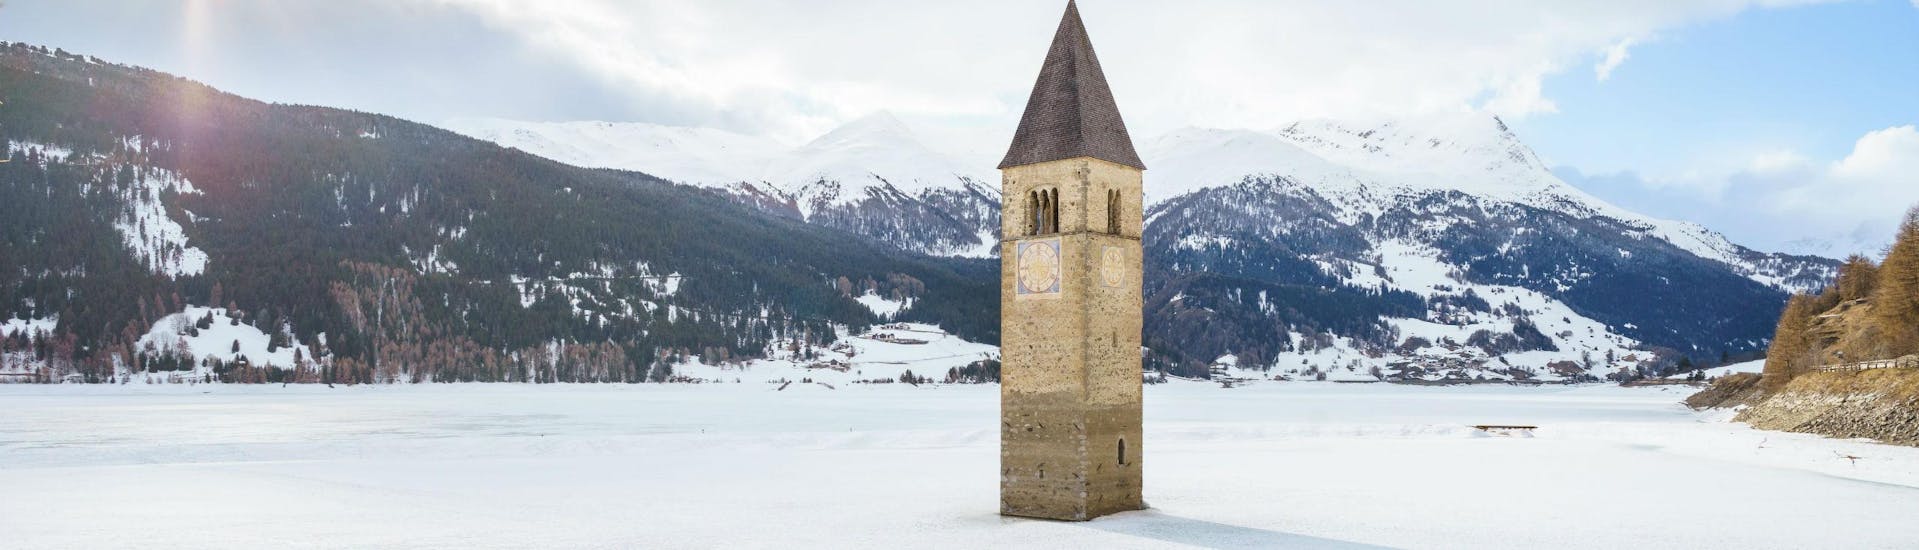 An image the sunken church in Lake Reschen close to the Austrian ski resort of Nauders, where aspiring skiers can book ski lessons with one of the local ski schools.